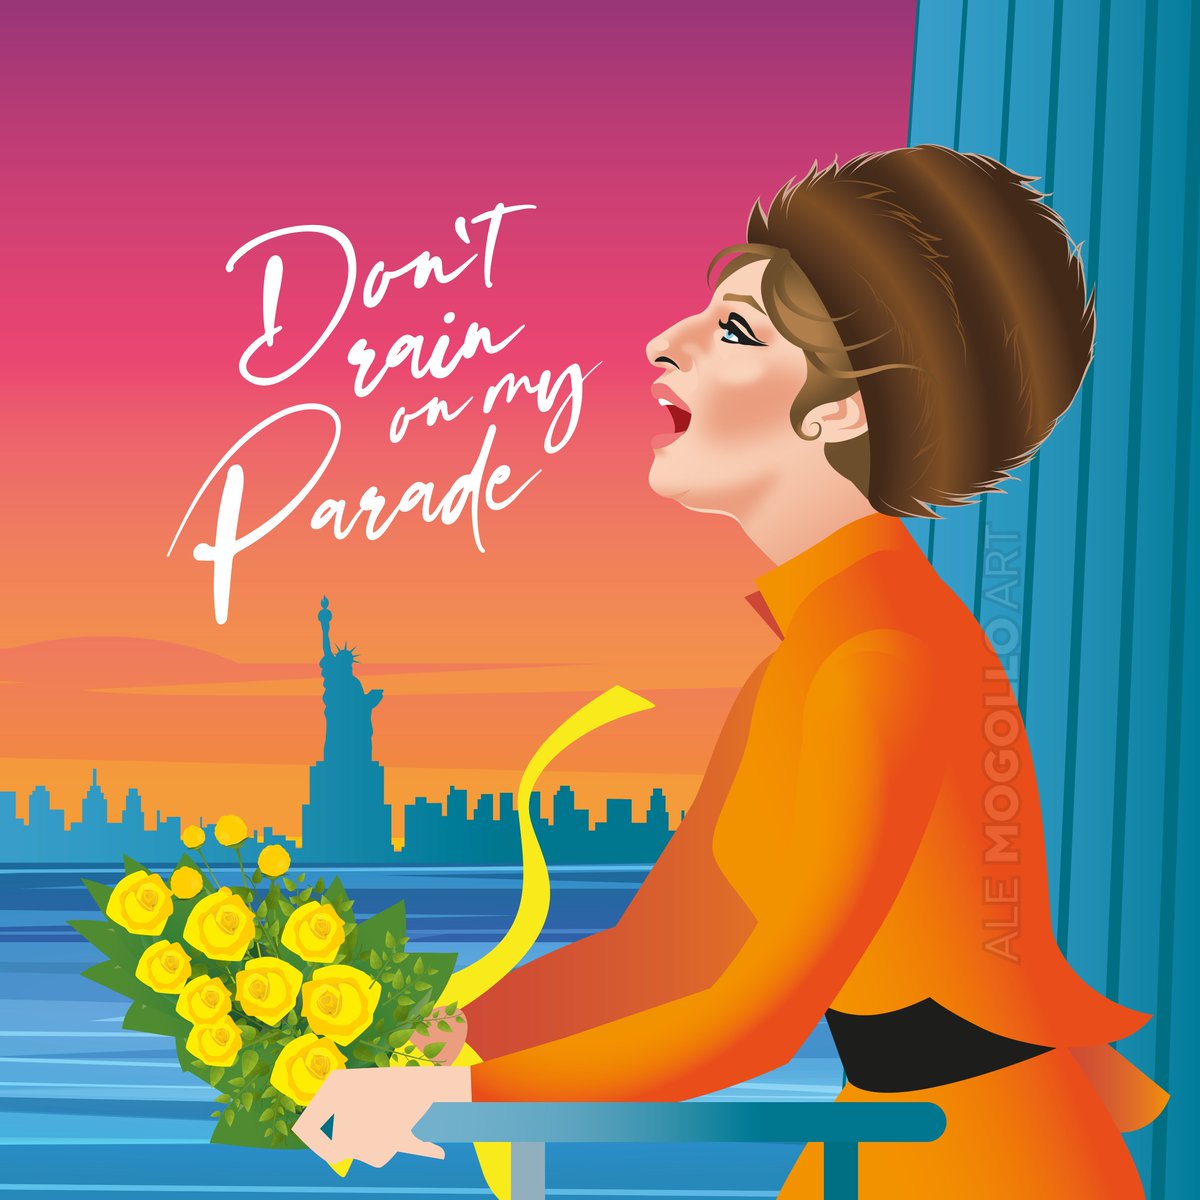 Heading into the weekend like...
Barbra Streisand as Fanny Brice singing Don't rain on my parade in Funny Girl.
#BarbraStreisand #funnygirl #dontrainonmyparade #hellogorgeous #weekendvibes #TCMParty #AlejandroMogolloArt